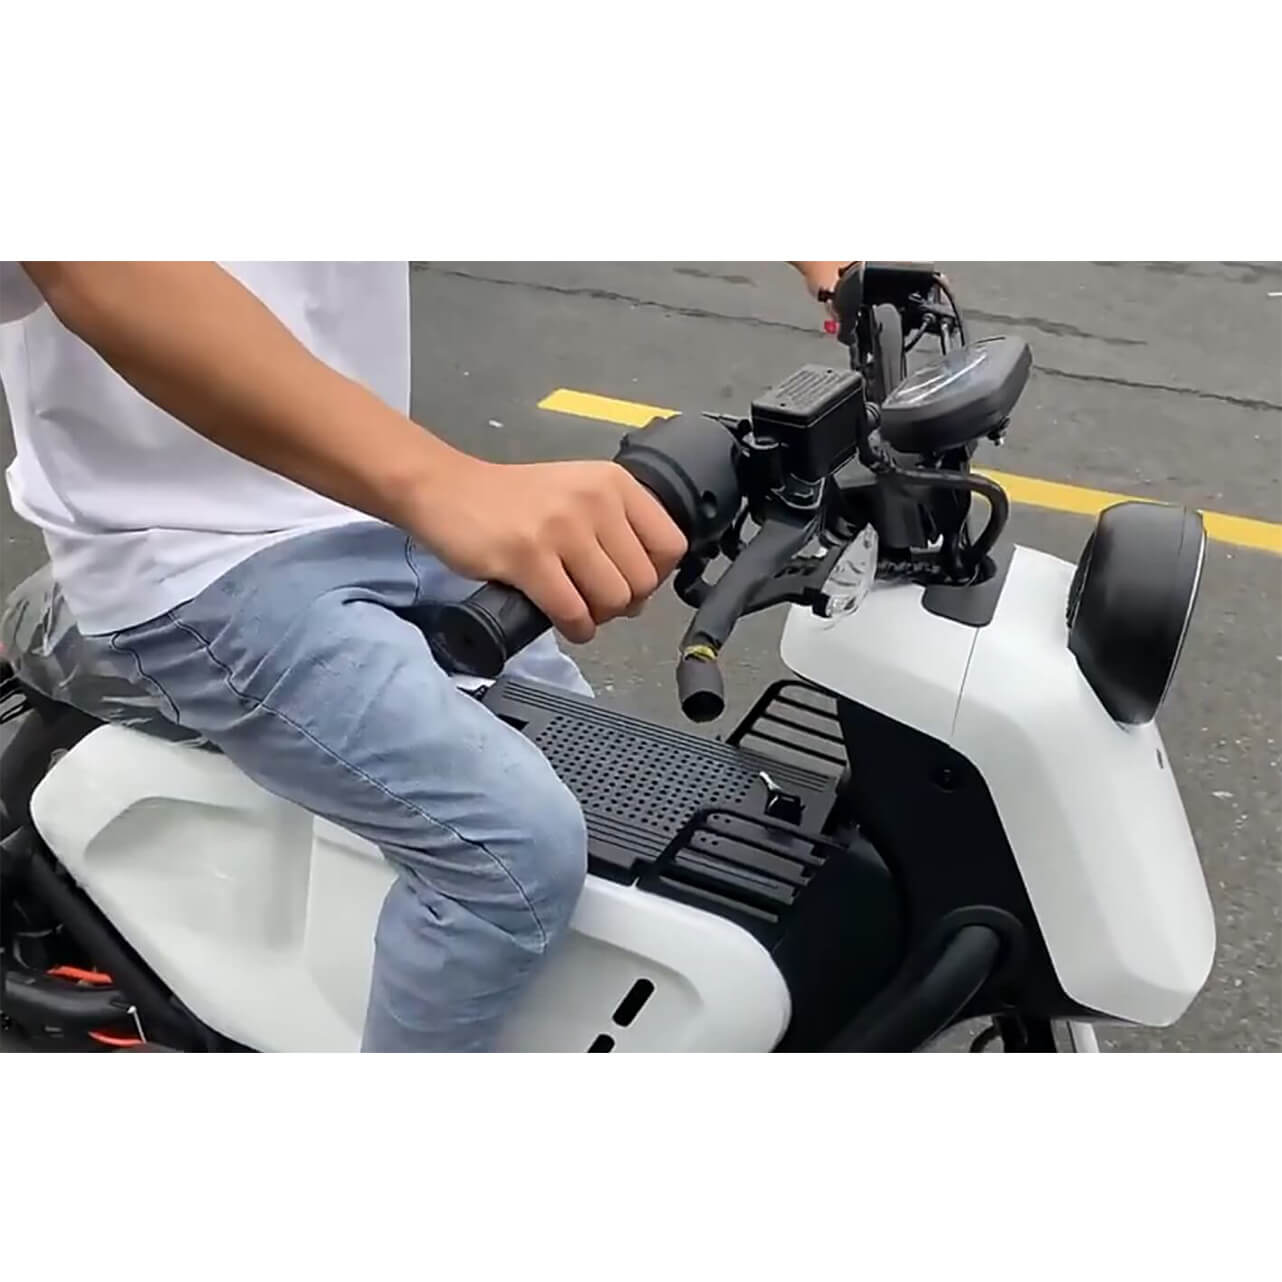 hydrogen fuel cell scooter